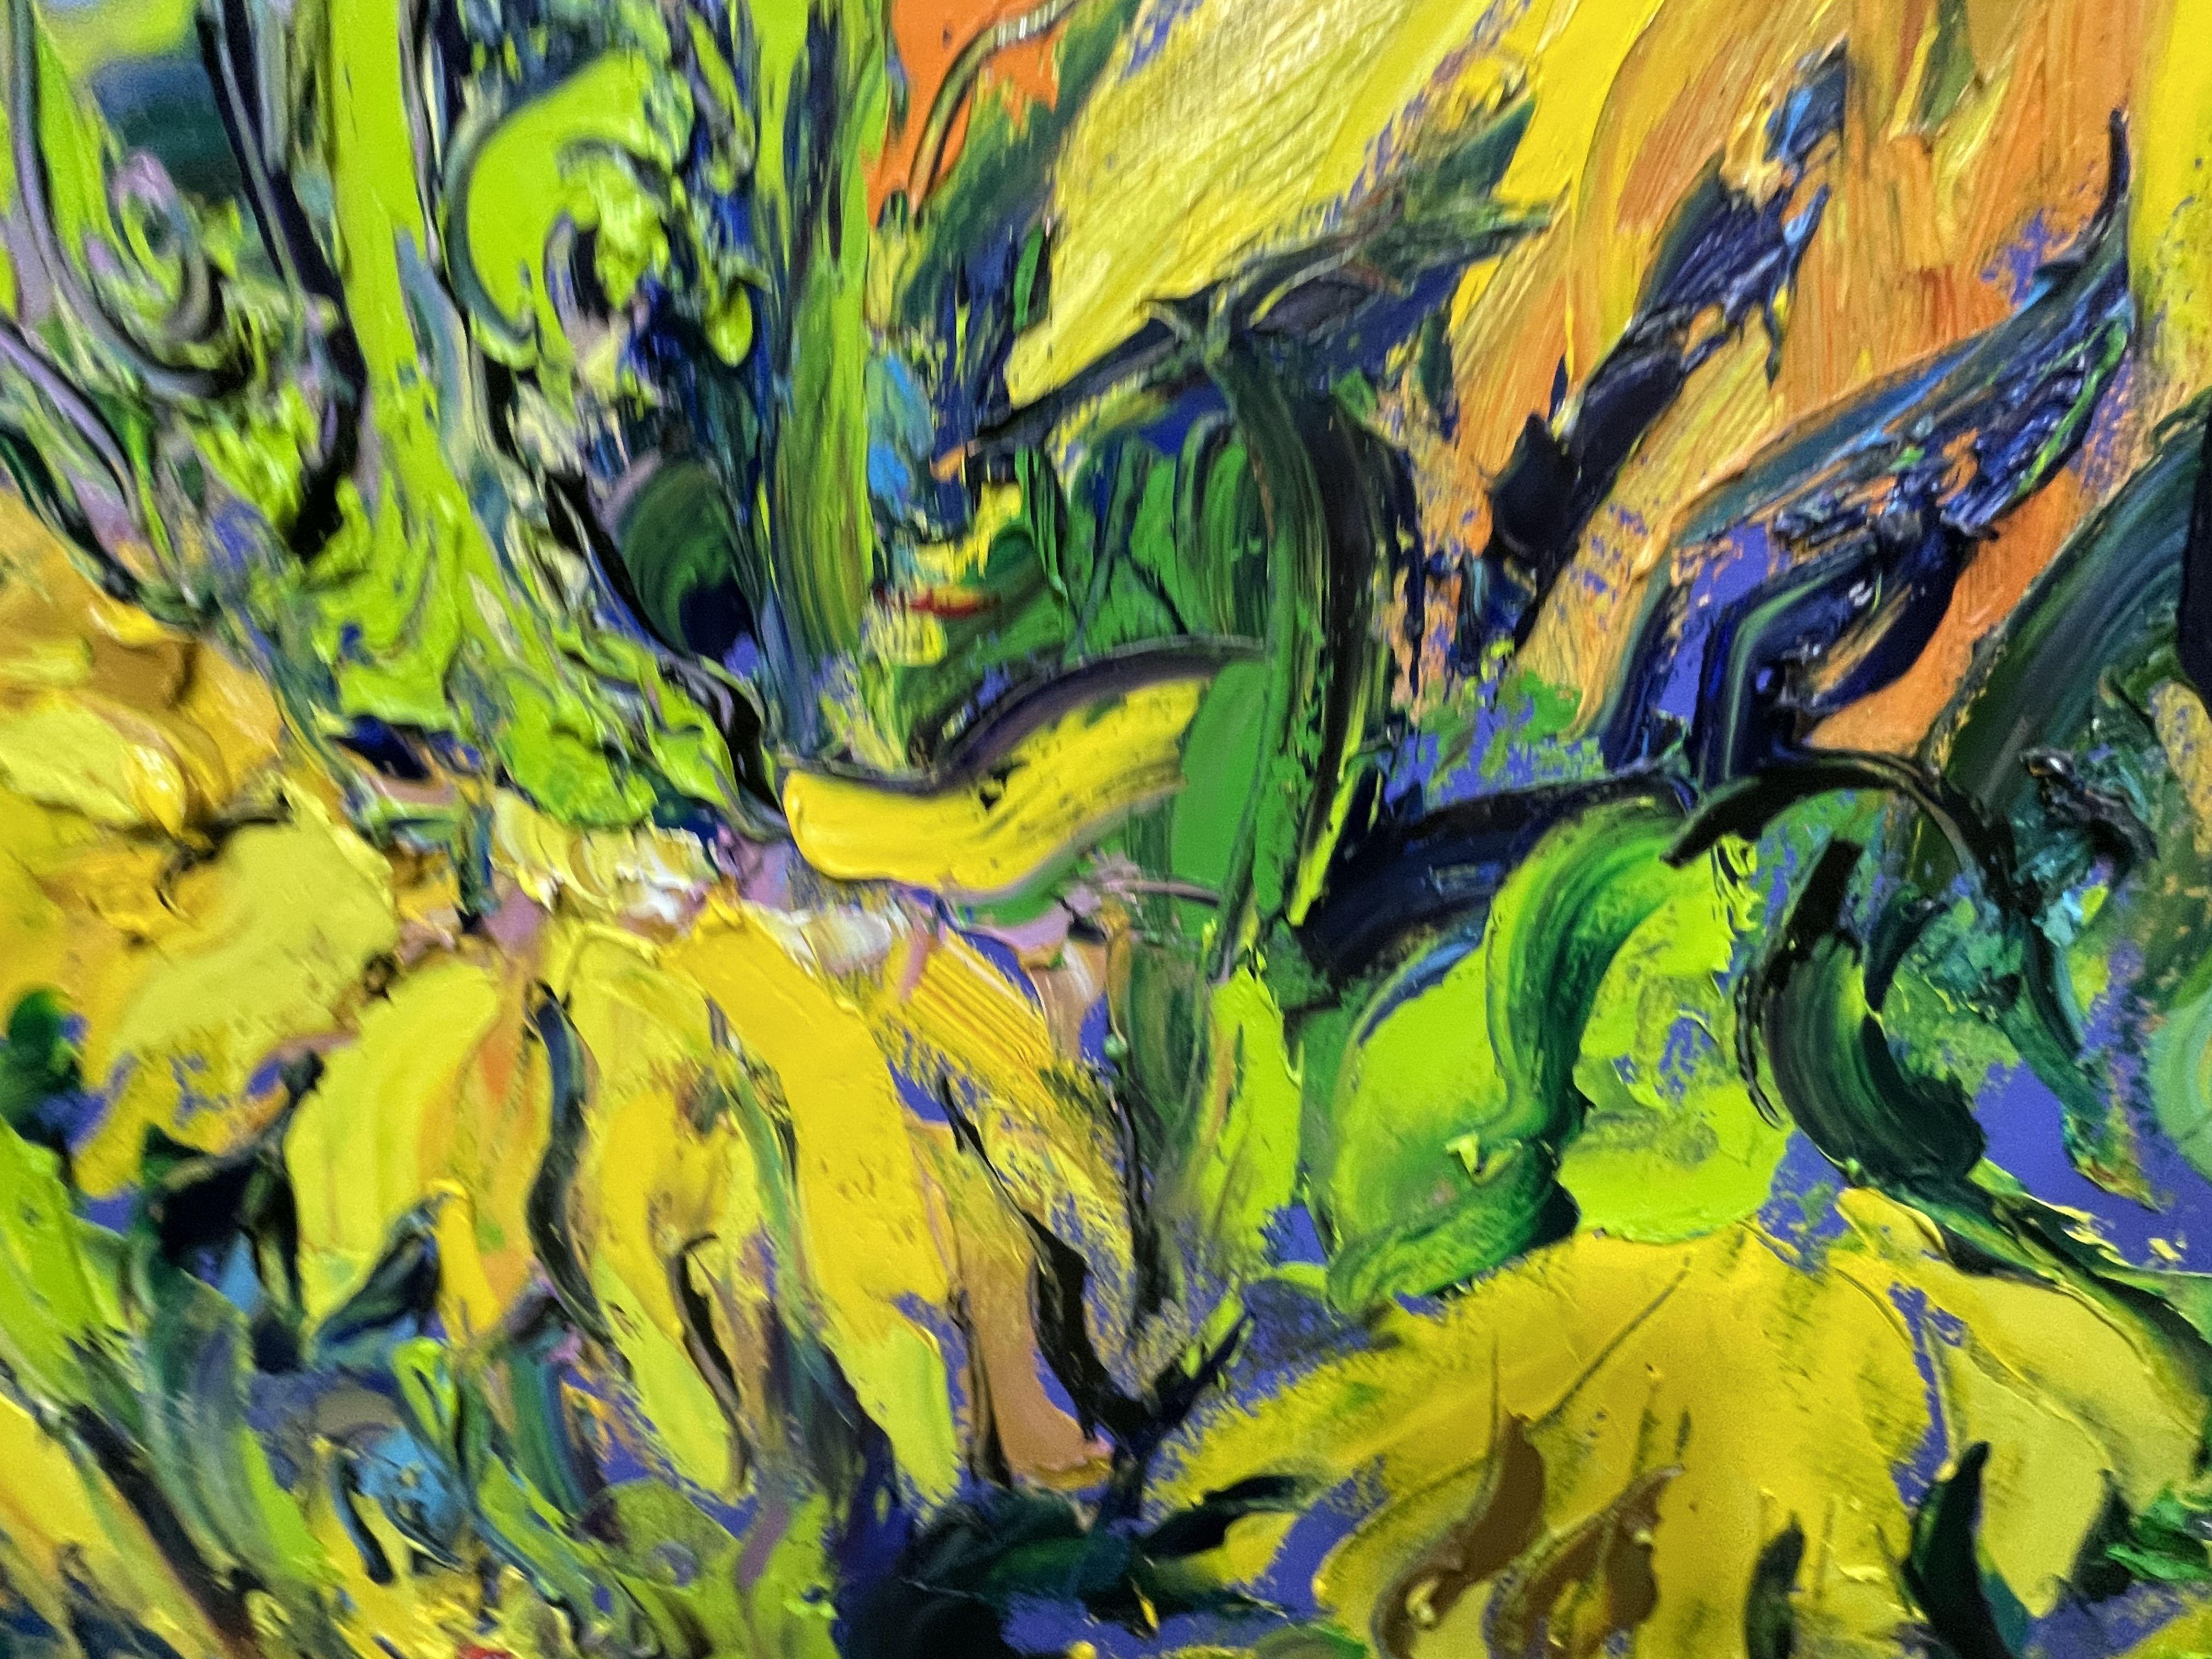 Sunflowers bloom, Painting, Oil on Canvas 2